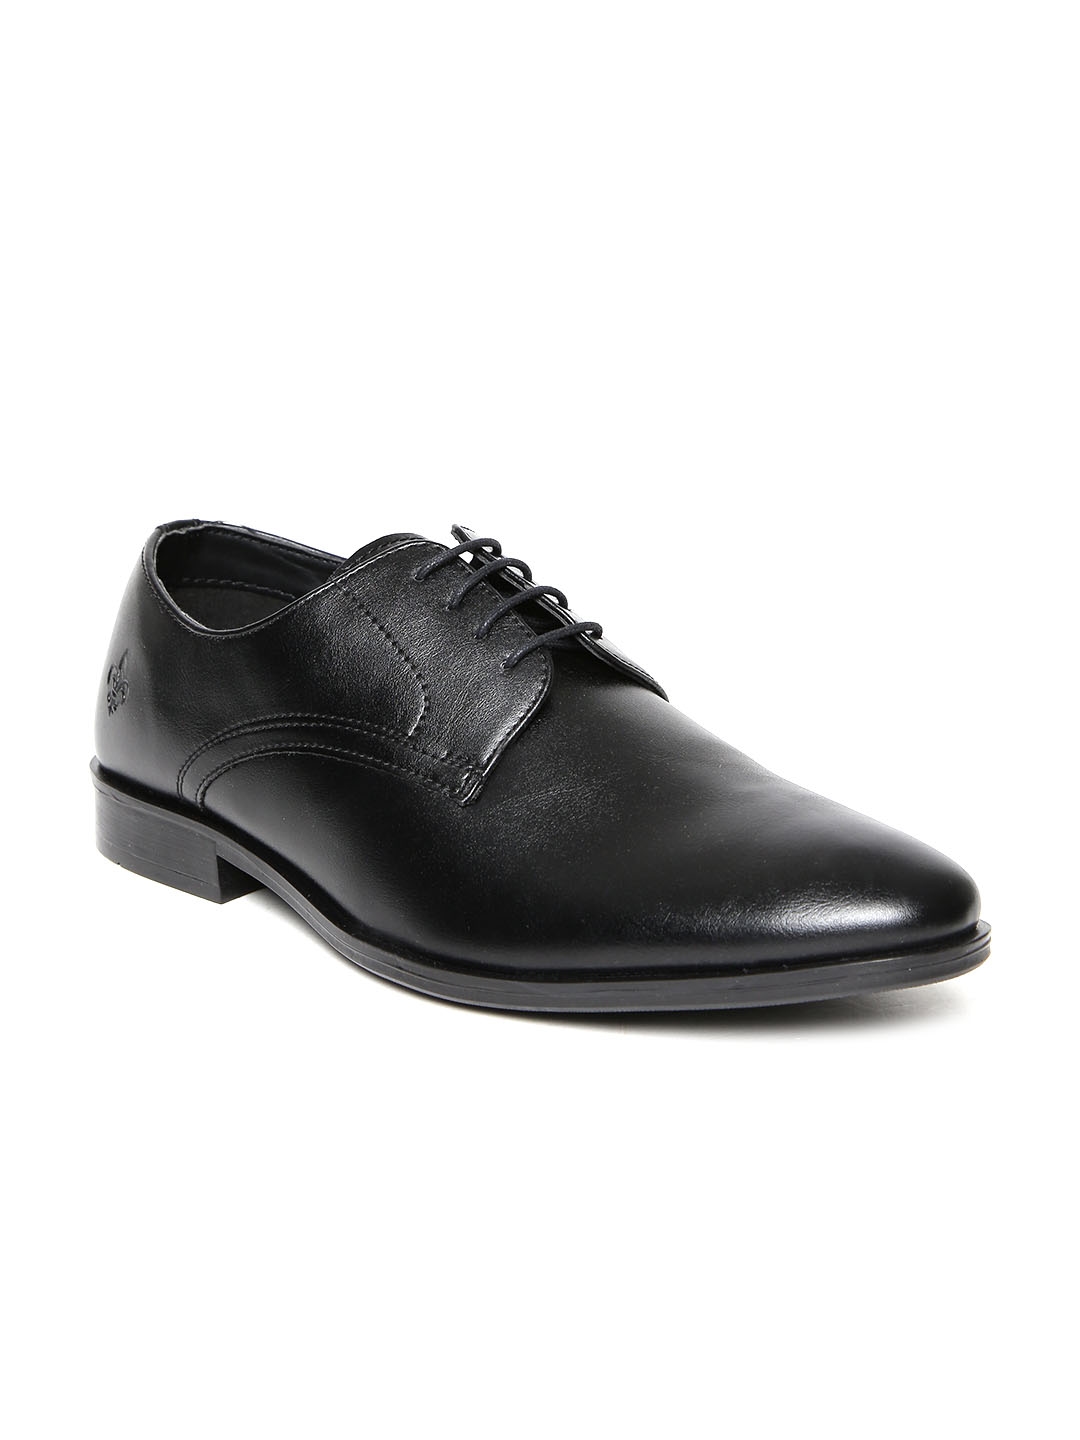 black leather formal shoes for mens